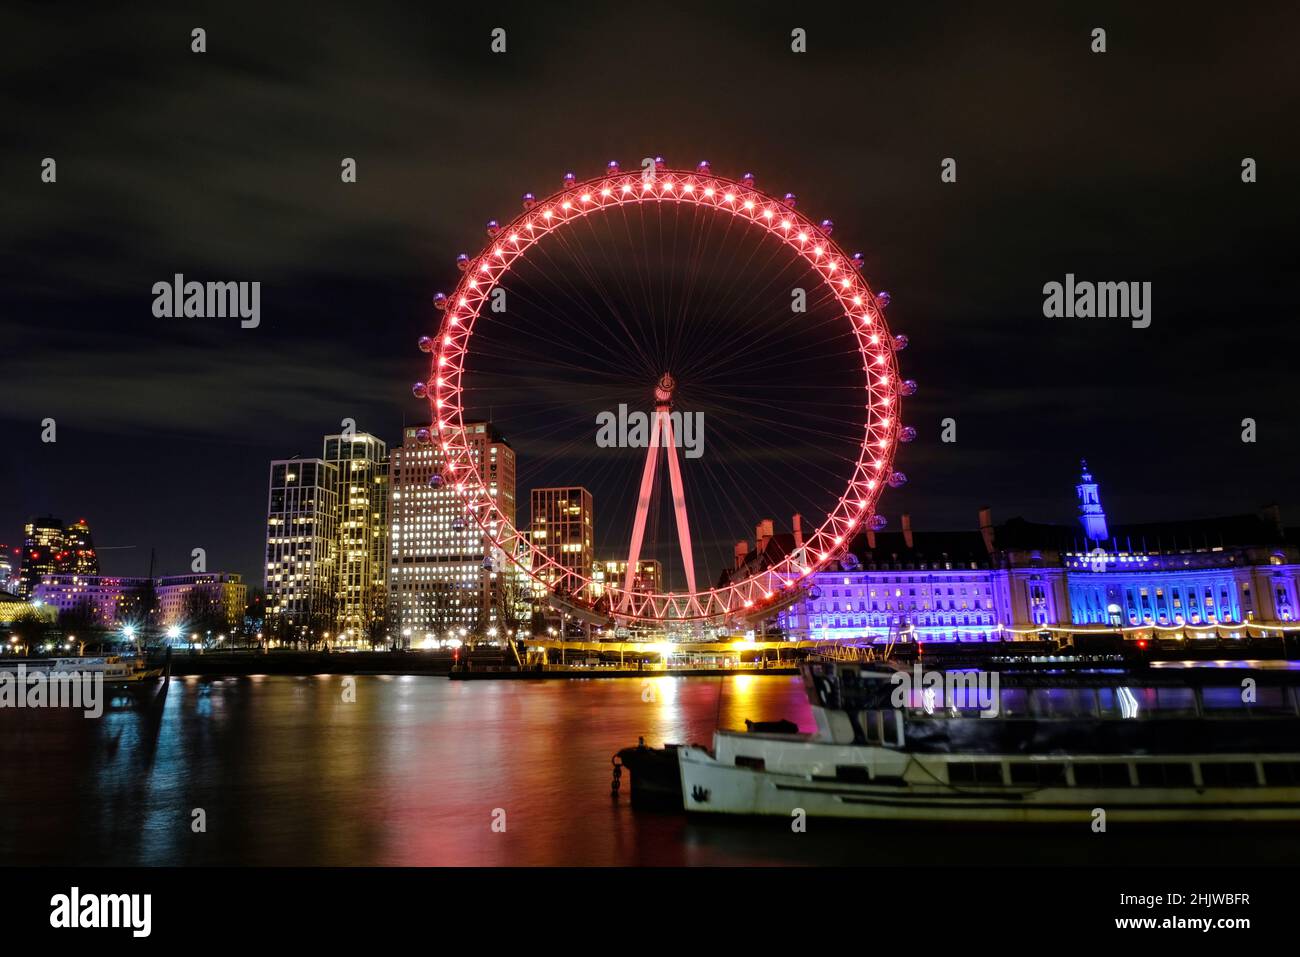 London, UK, 31st Jan, 2022. The London Eye, as seen from the River Thames is lit-up in red to celebrated the Lunar New Year - or Chinese New Year which falls on the 1st February. Credit: Eleventh Hour Photography/Alamy Live News Stock Photo